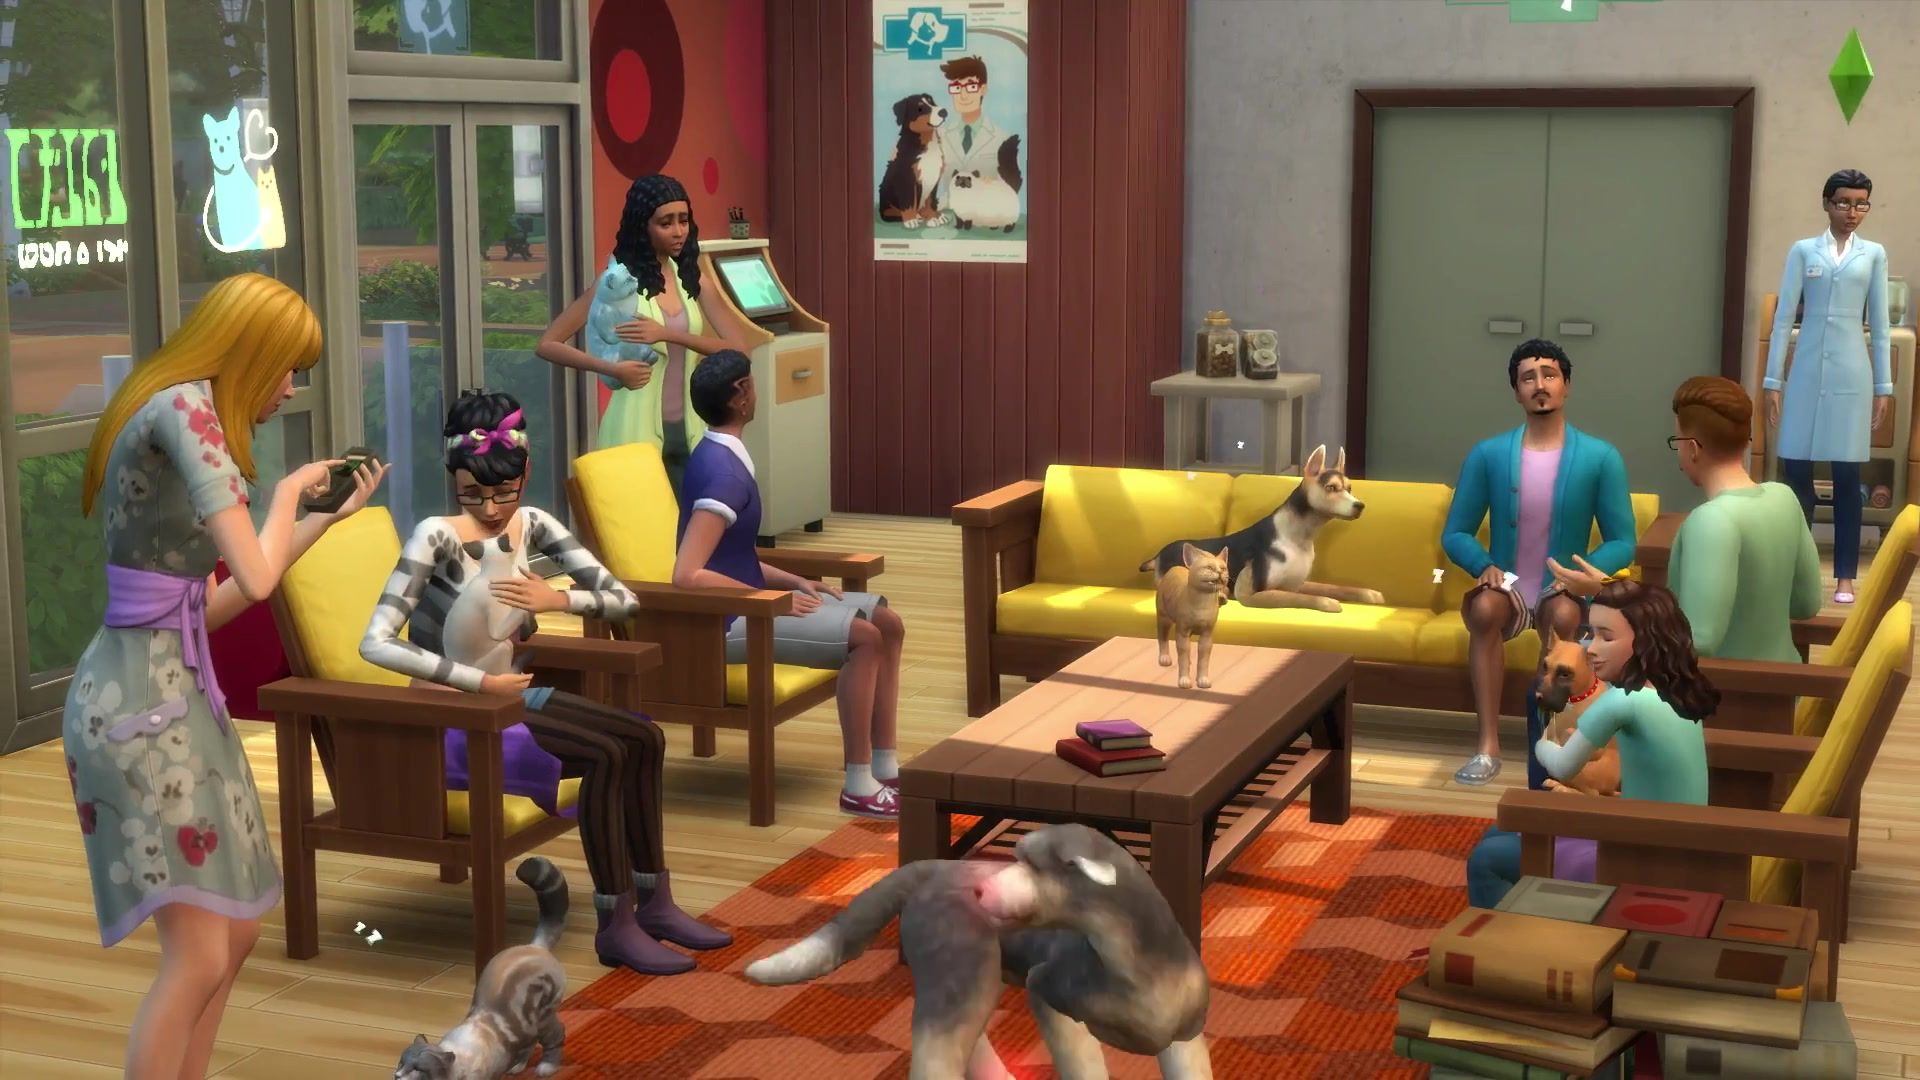 Tons of new waiting room furniture in Sims 4 Cats  Dogs.